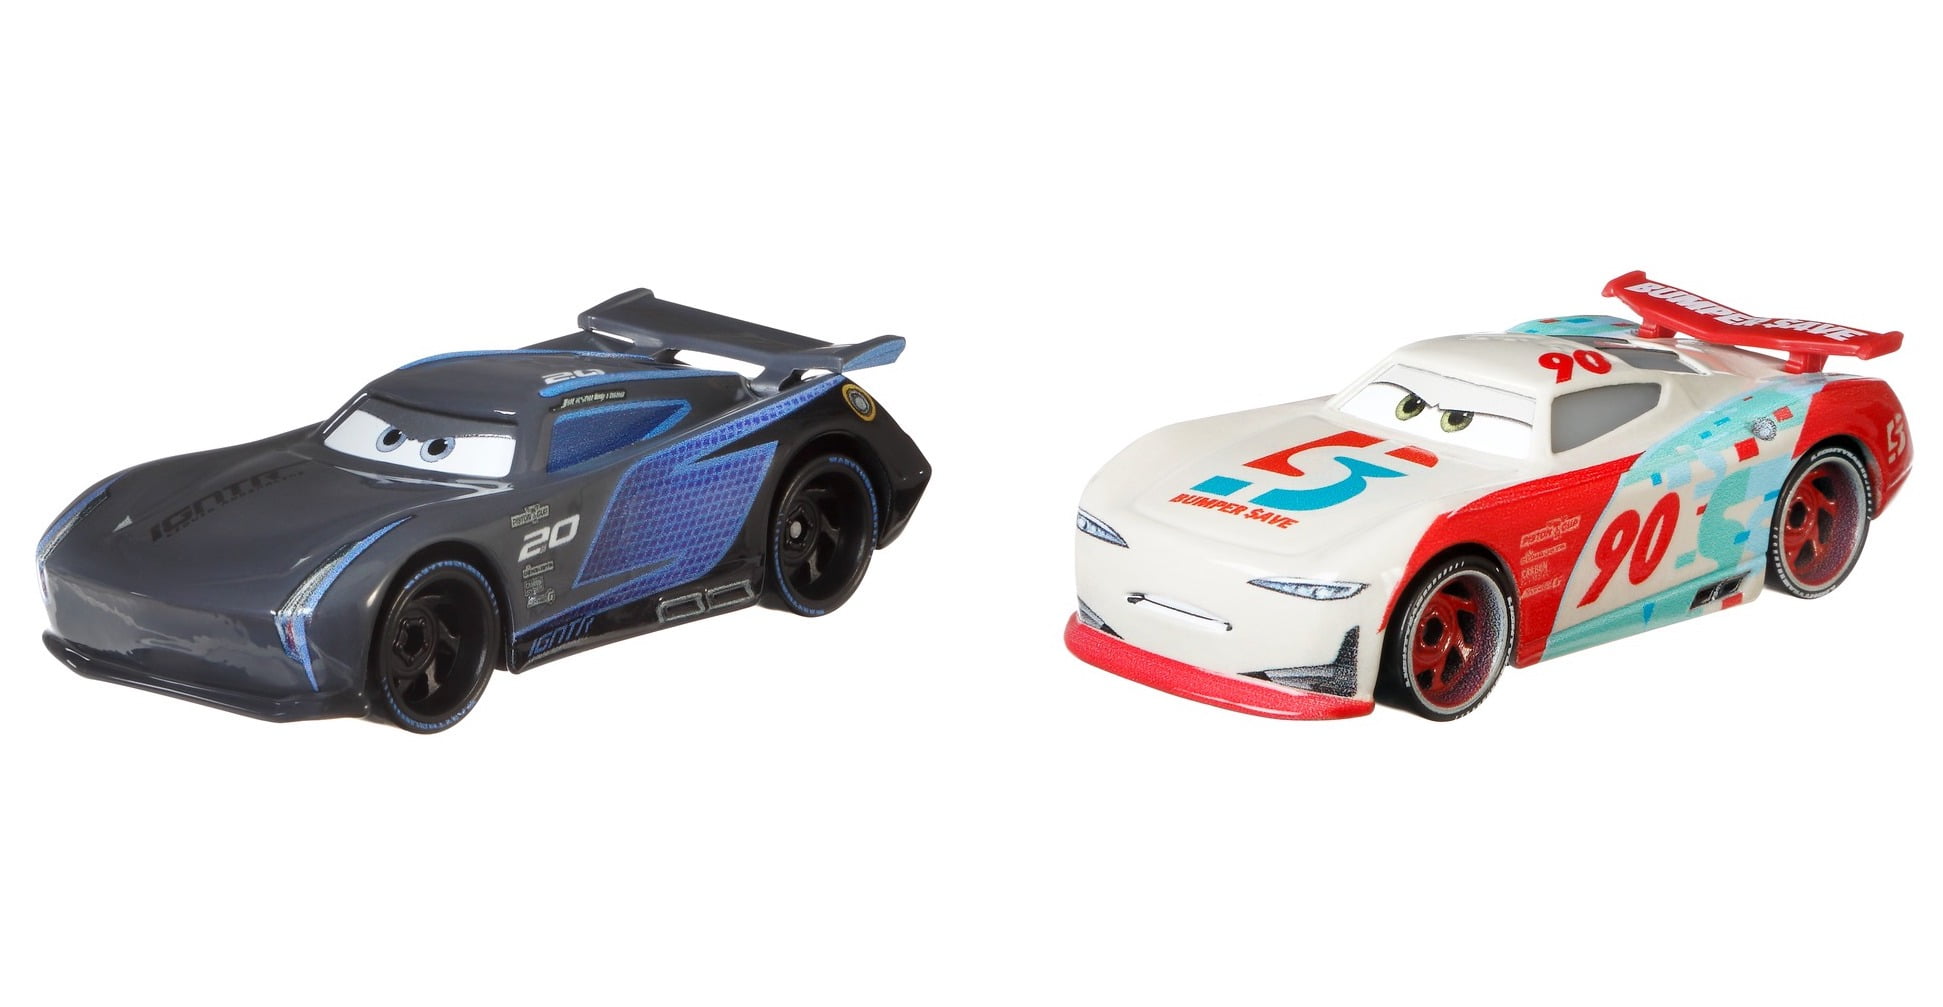  Disney Cars Toys and Pixar Cars 3, Mater & Lightning McQueen  2-Pack, 1:55 Scale Die-Cast Fan Favorite Character Vehicles for Racing and  Storytelling Fun, Gift for Kids Age 3 and Older